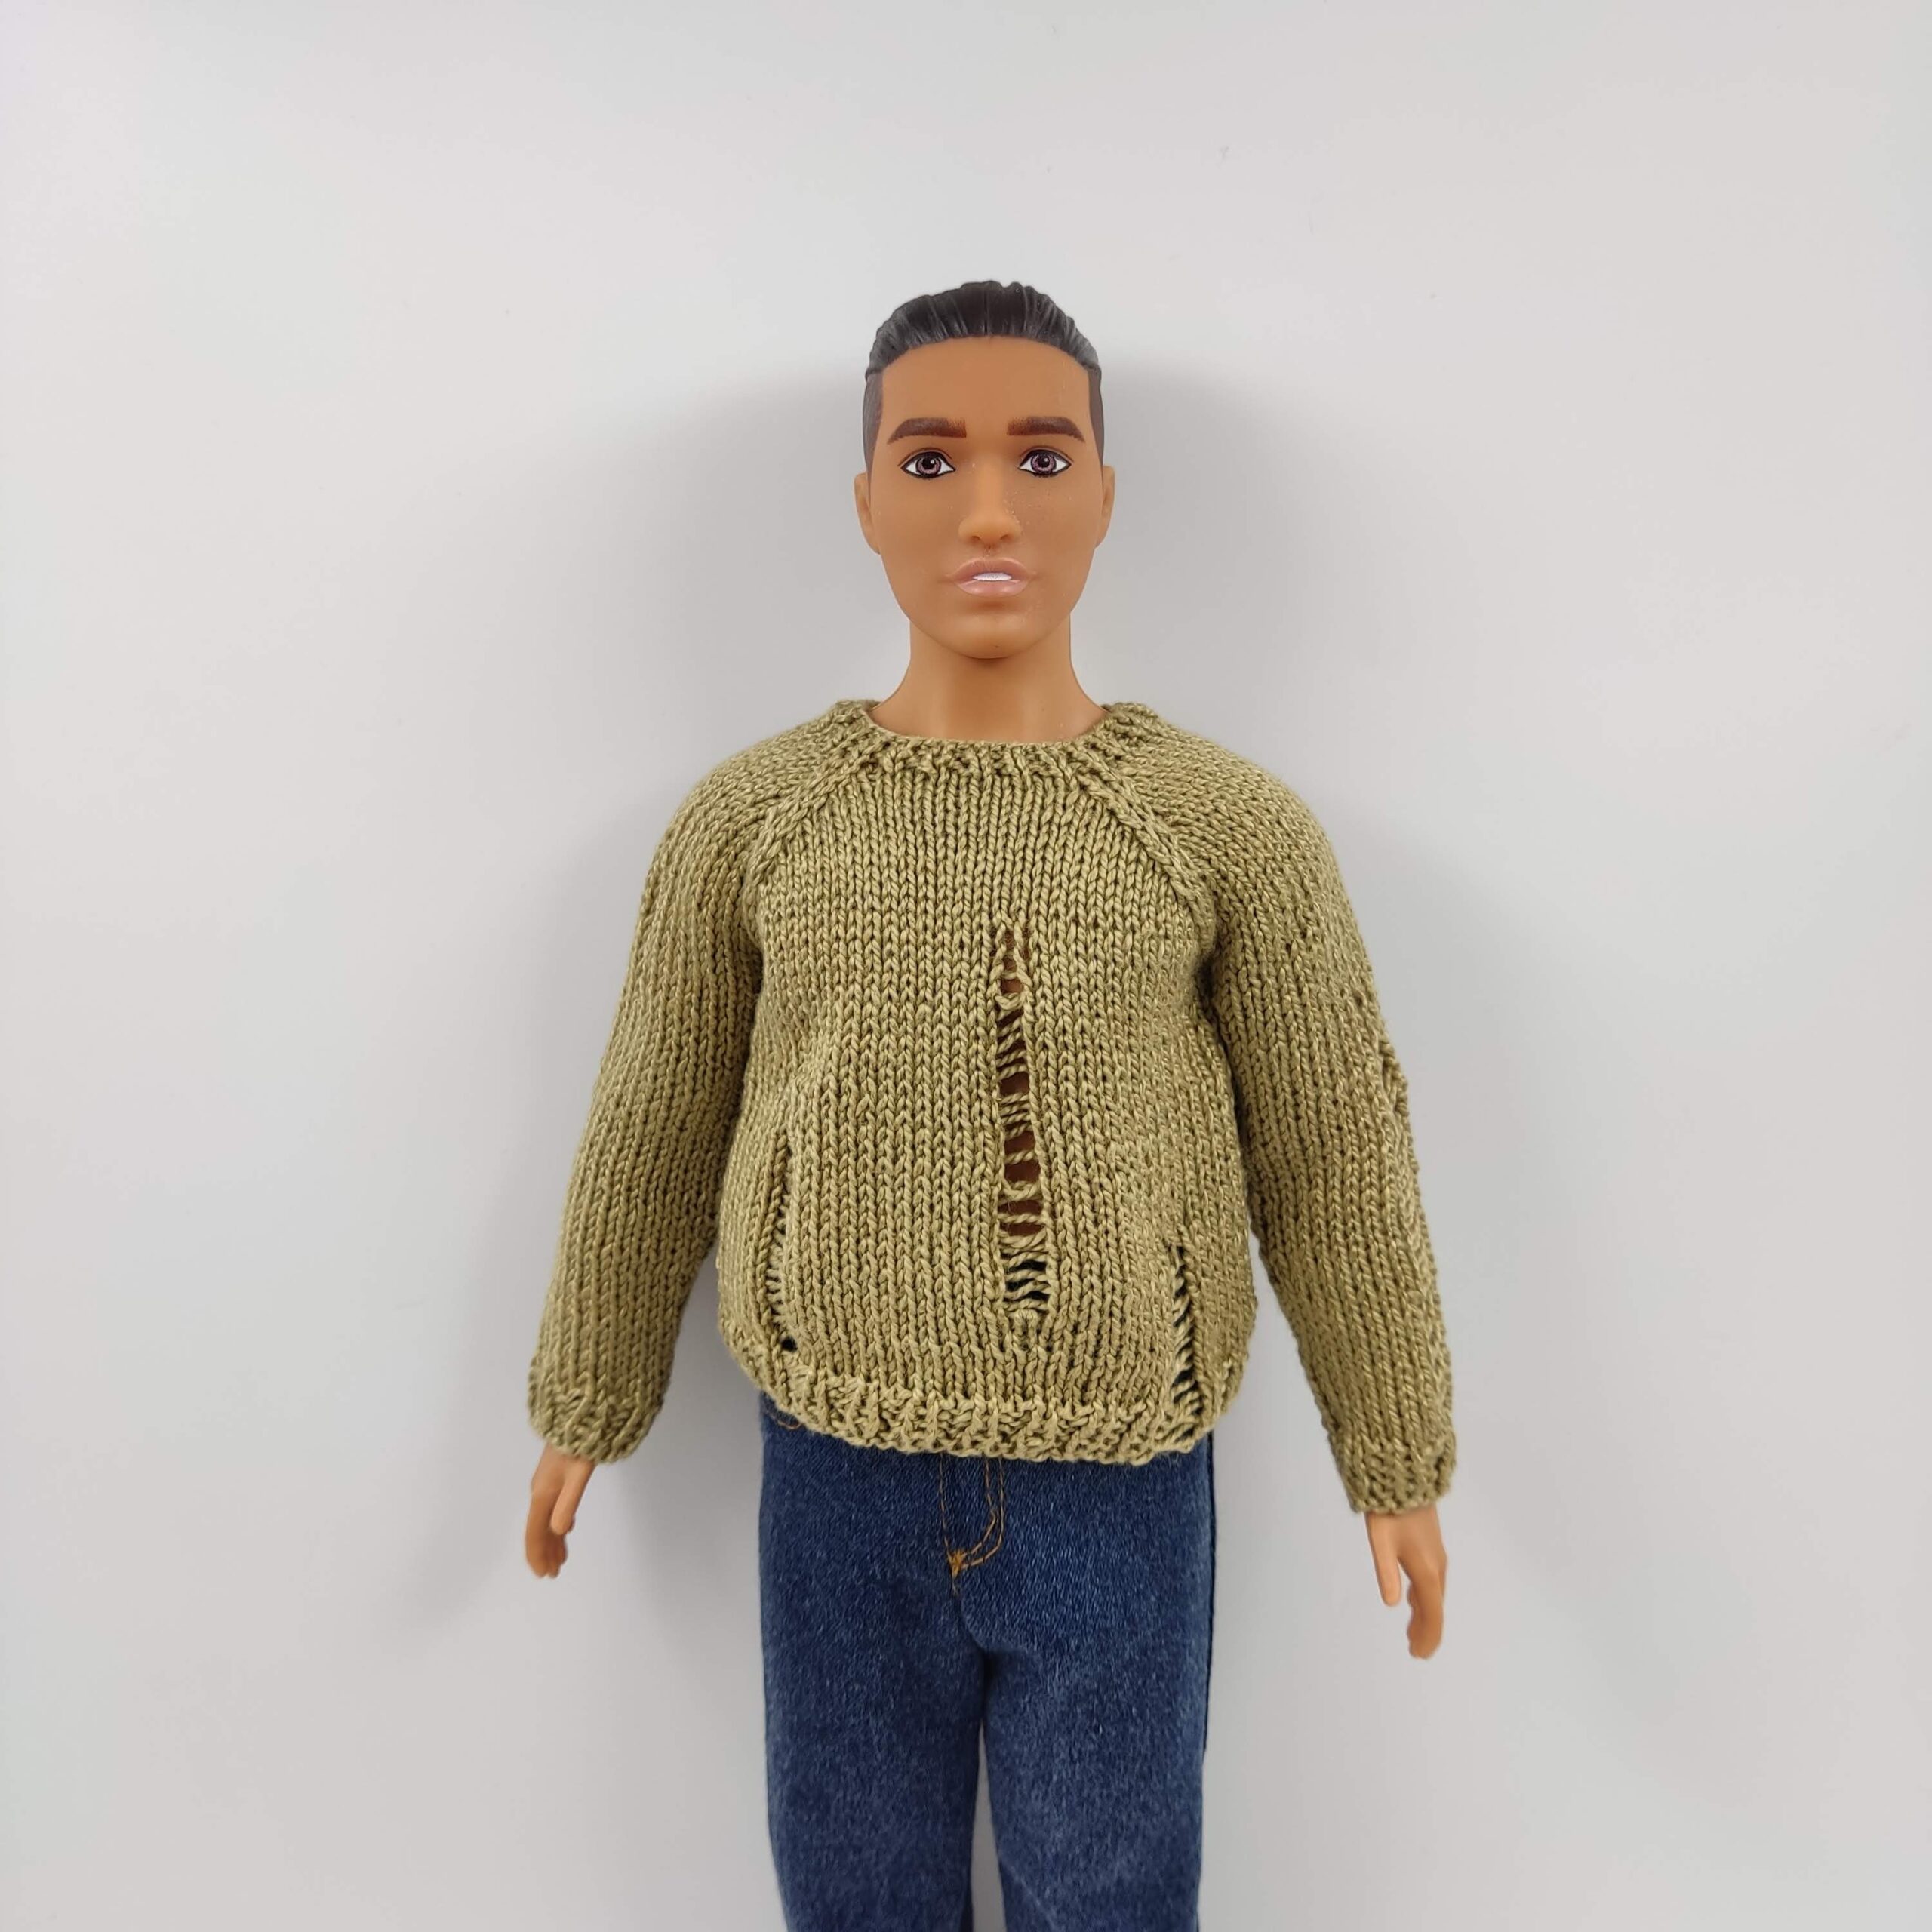 Ken doll clothes  Custom sweater 24 colors